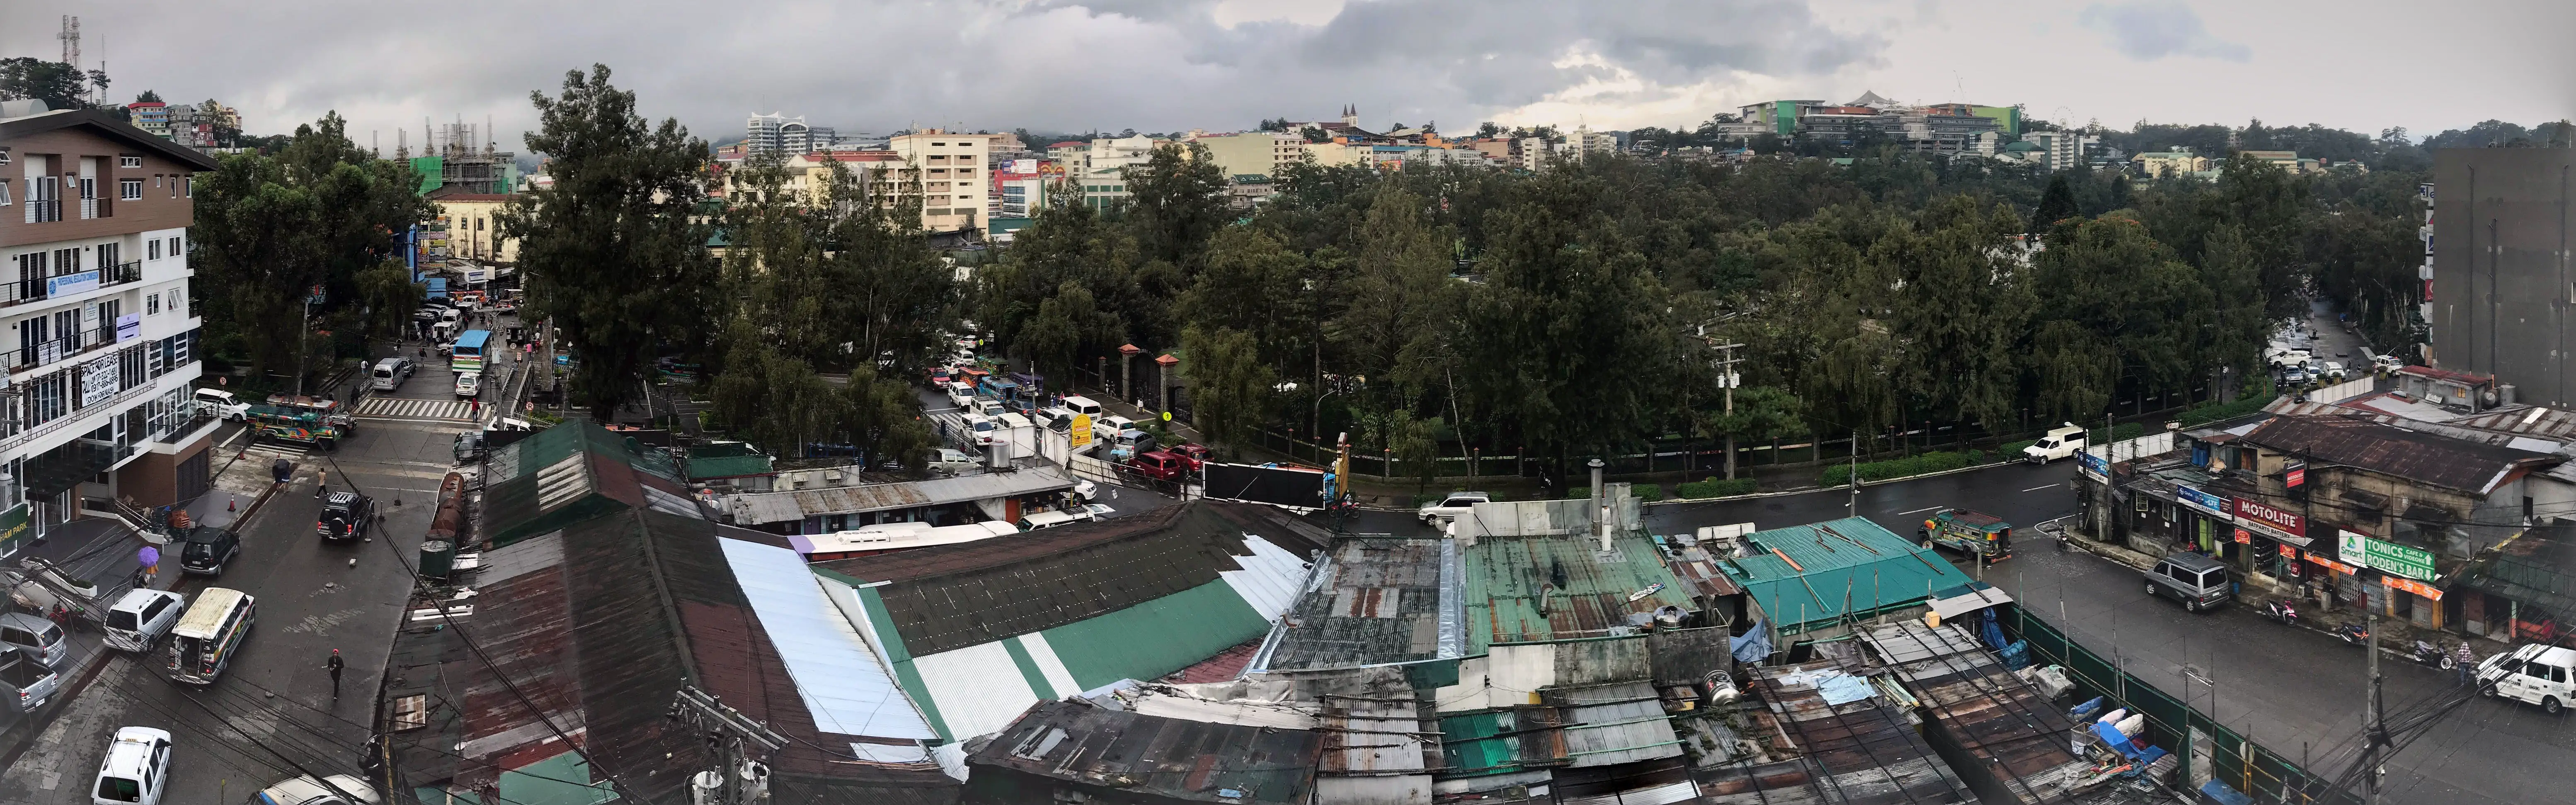 The good, the bad and the ugly about visiting Baguio in Philippines